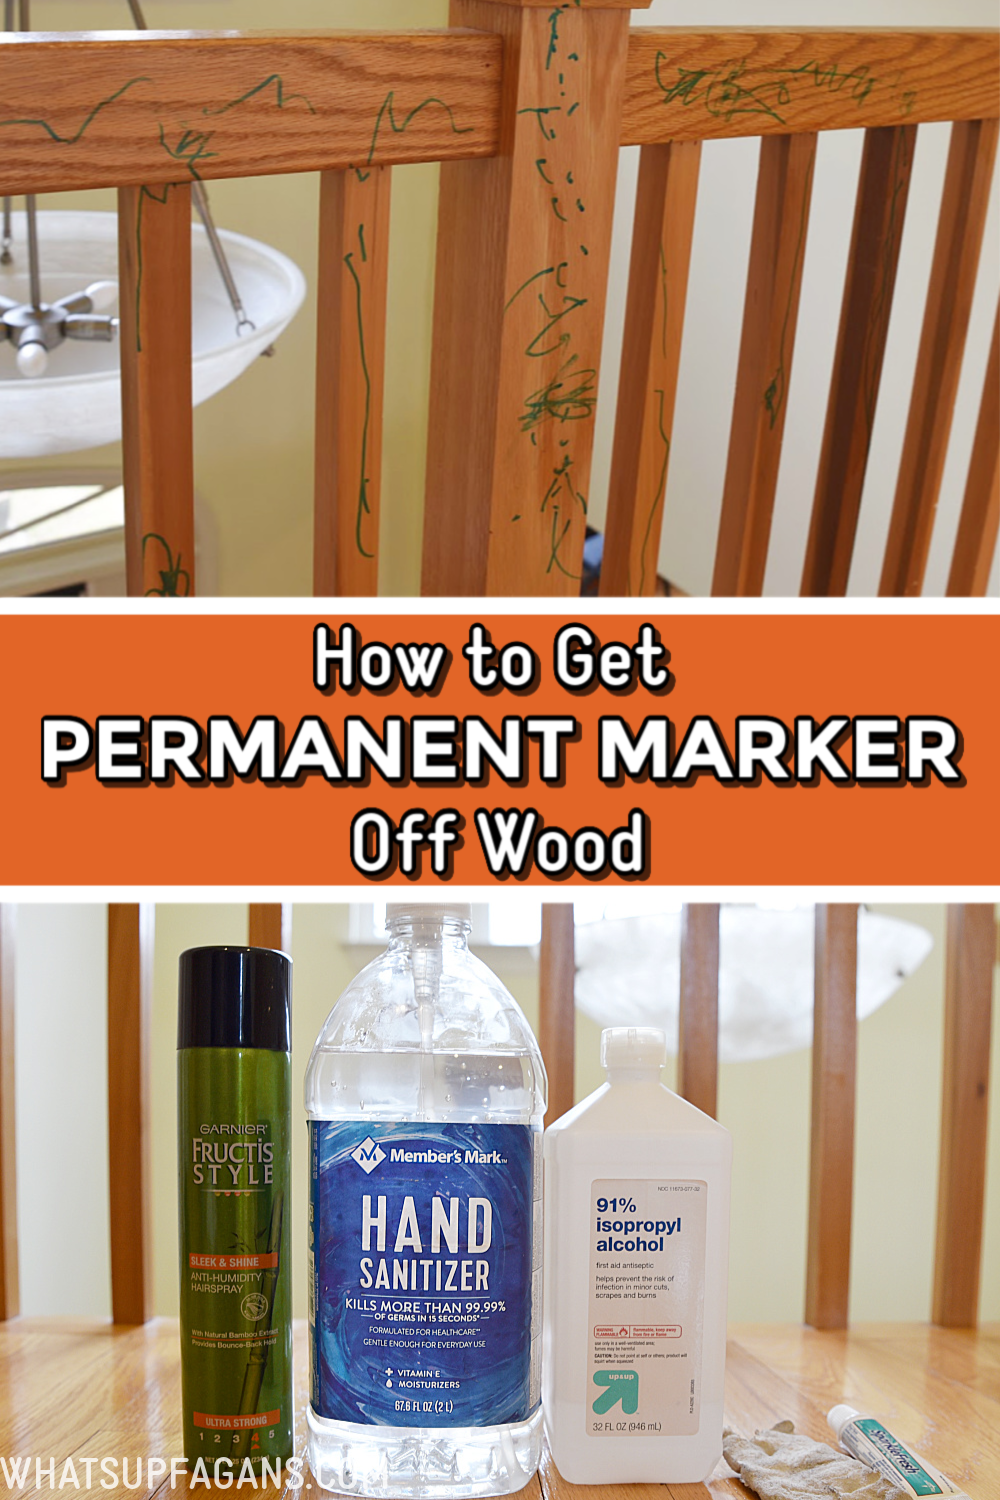 How to Get Permanent Marker Off Wood (Without Damaging It)